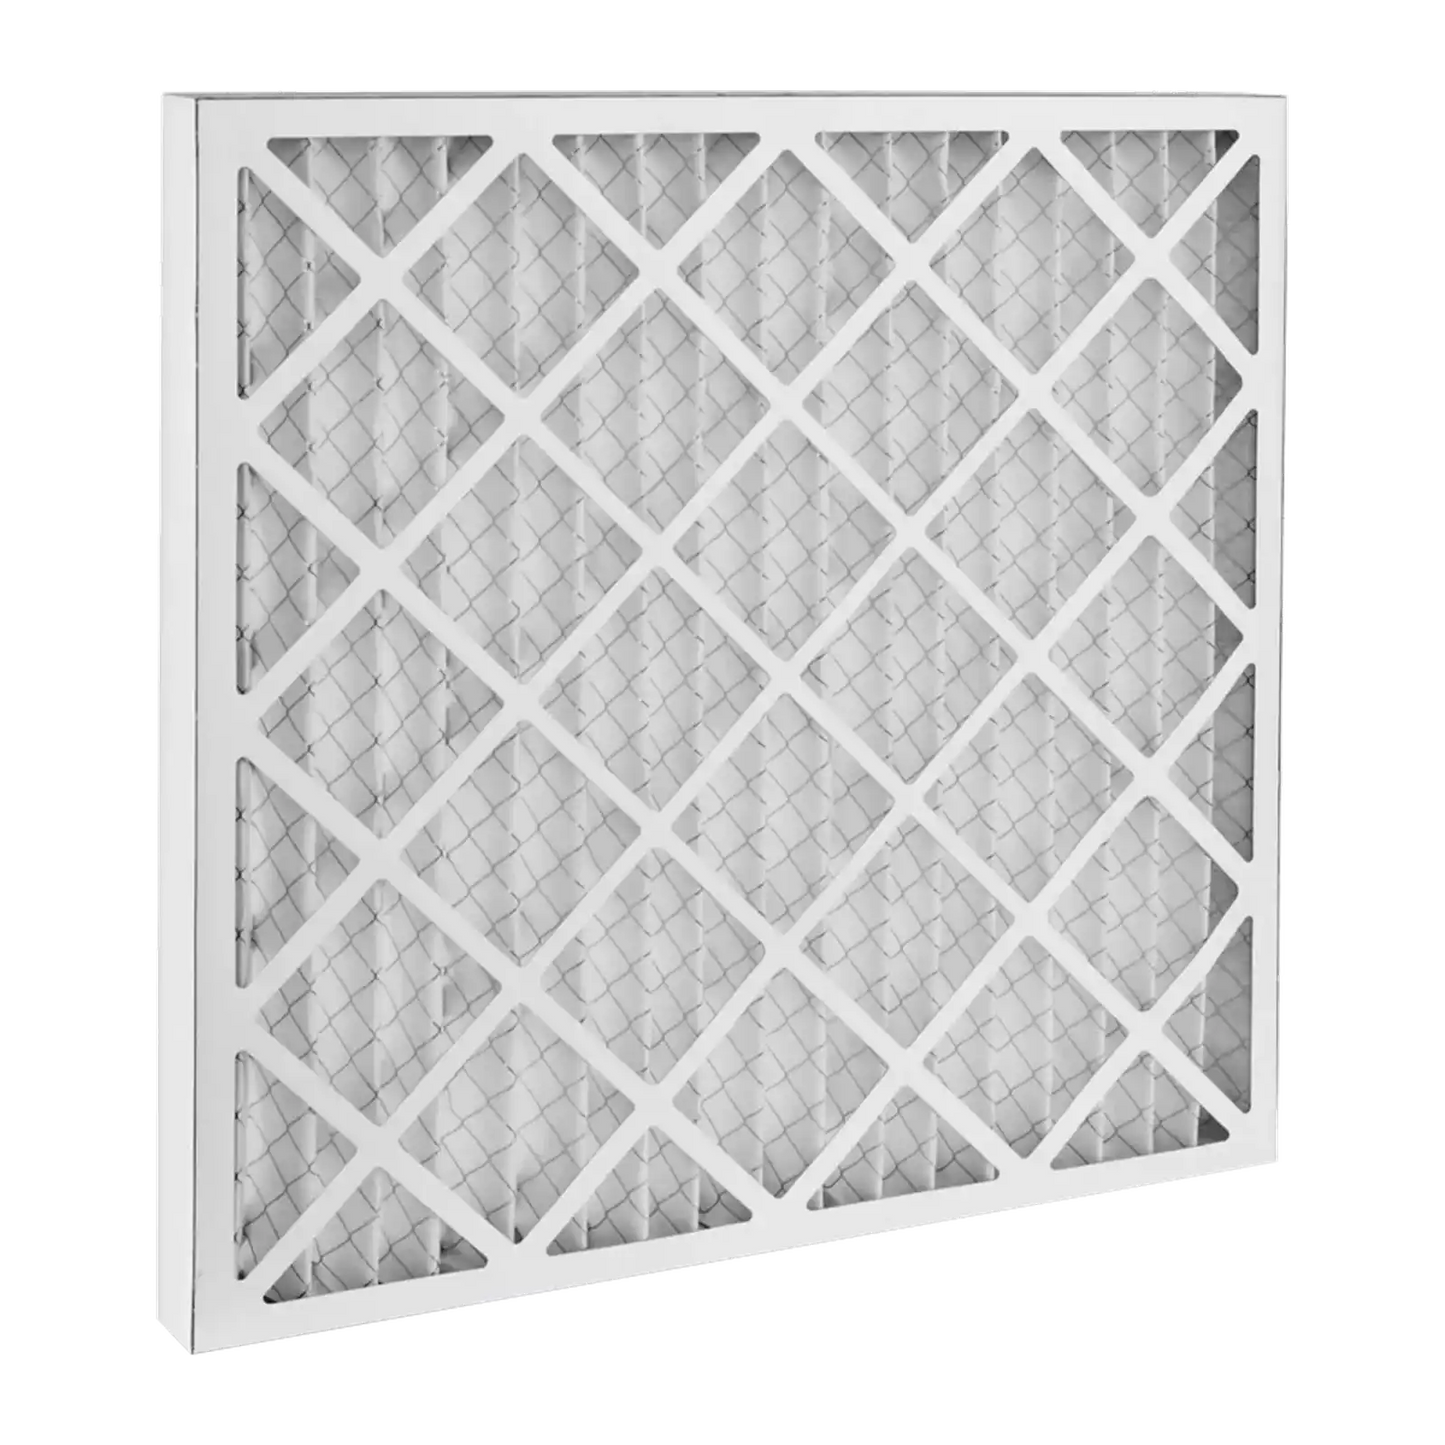 Dafco 12x20x1 Furnace AC Filter - Case of 12